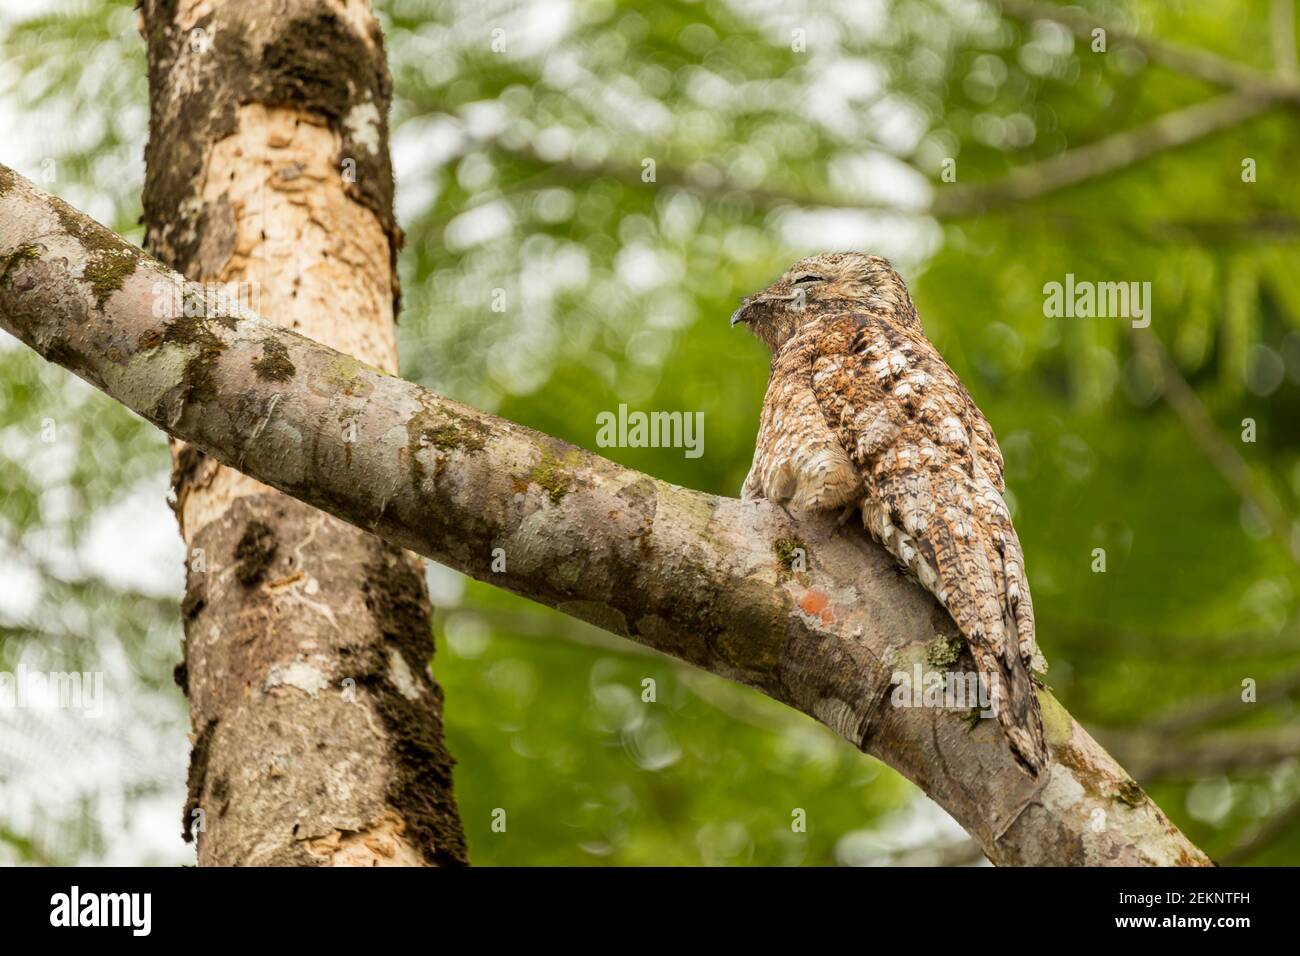 Potoo (Nyctibius Grandis) bird camouflaged on a tree branch with brown and white feathers totally still in the rainforest Stock Photo